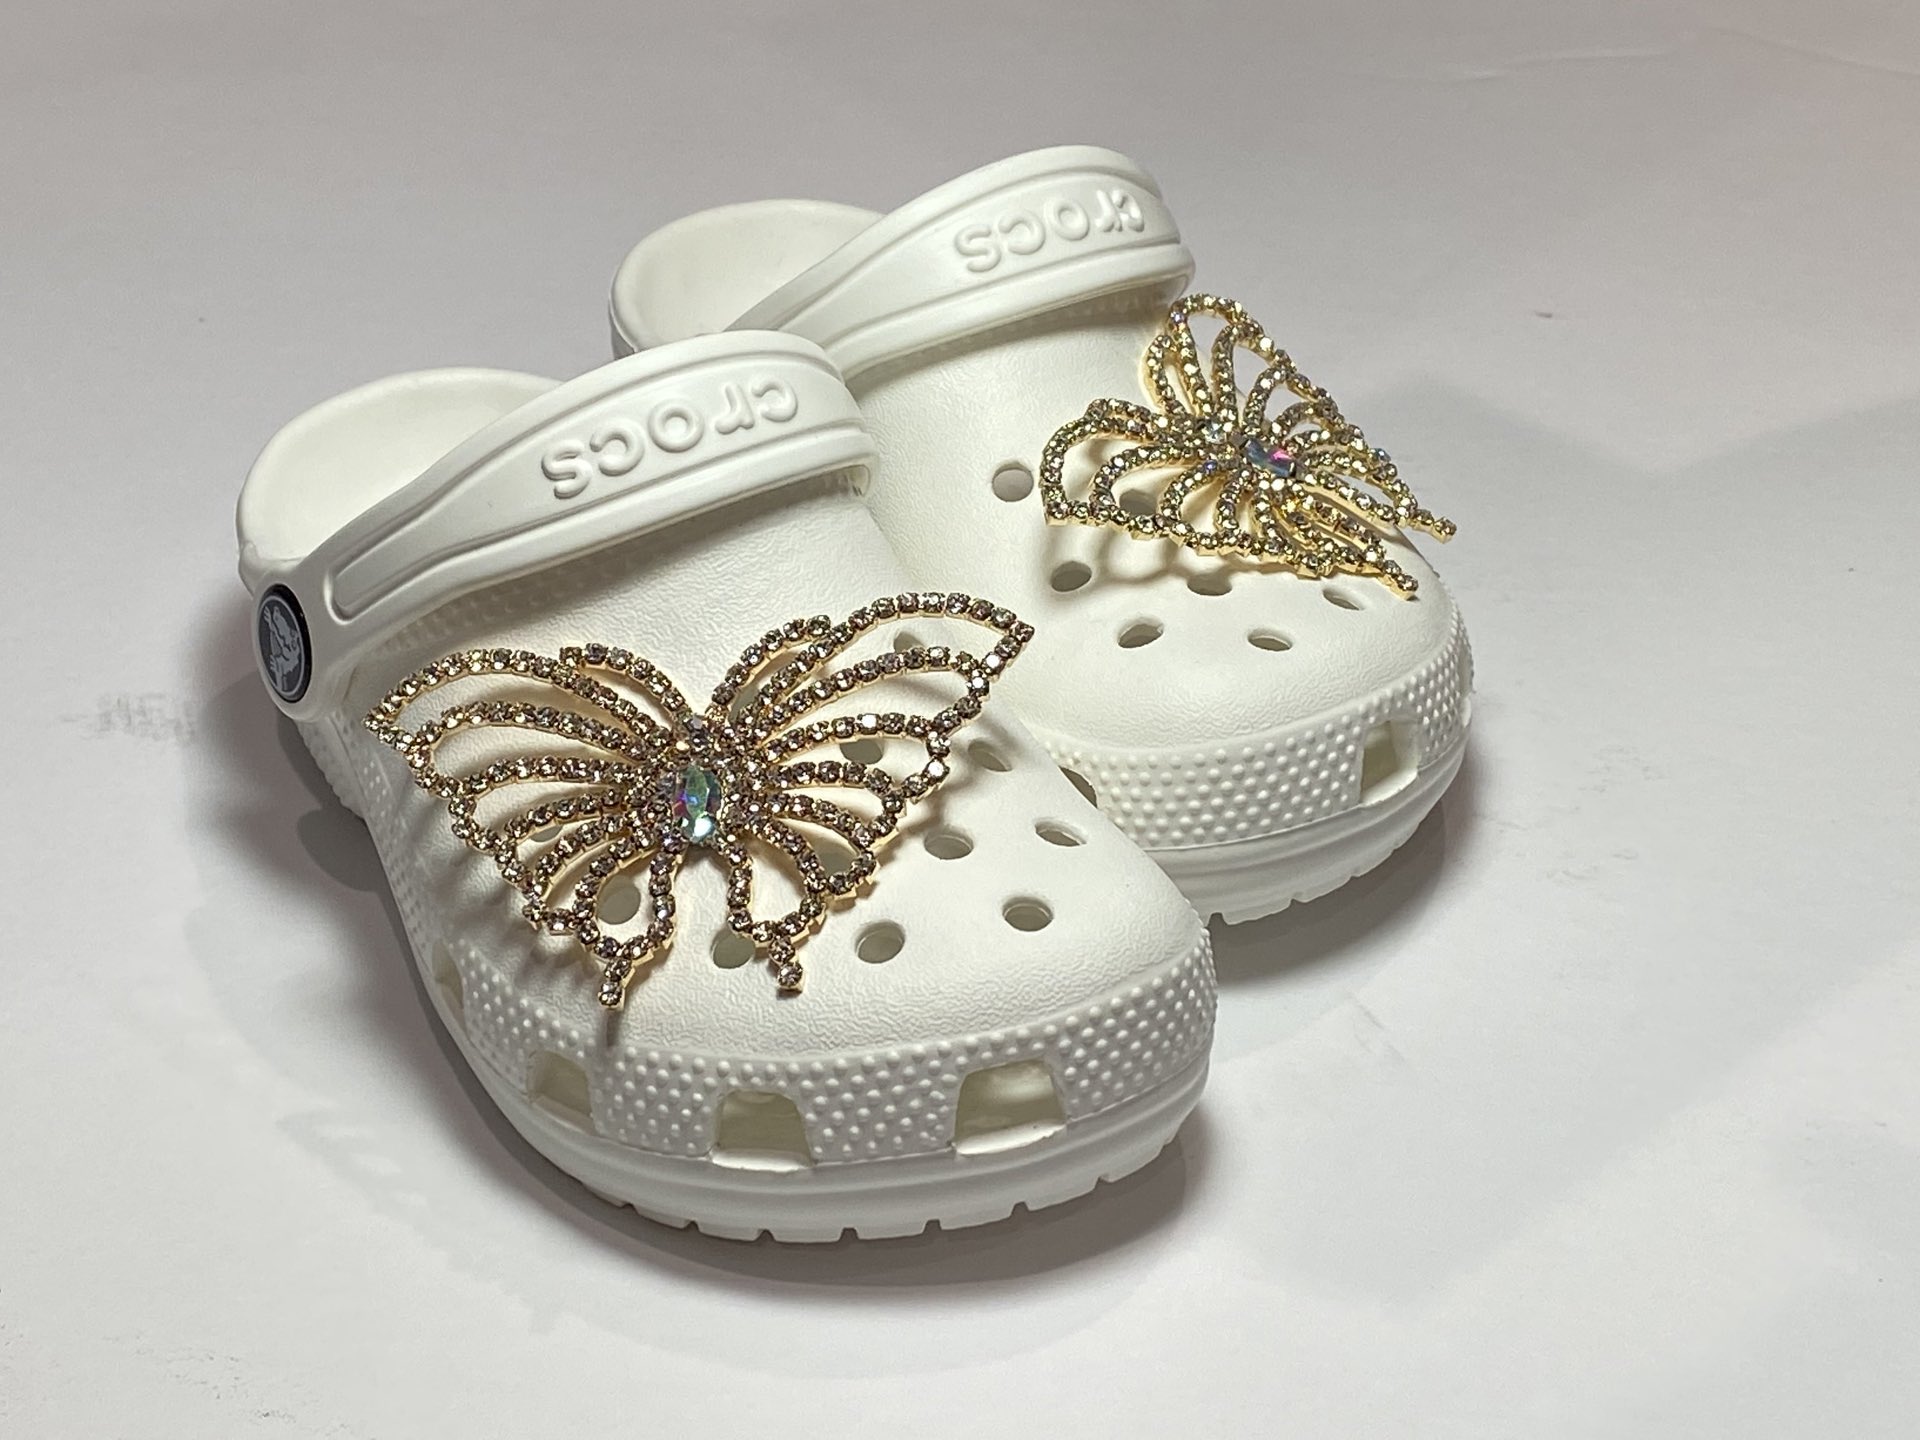 YLFaith on X: Excited to share this item from my # shop: Croc Charms  Luxury 2 Butterfly Rhinestone for Shoes, Charms for your Crocs   #bestseller #topjibbitz #bearjibbitz #handmade # design #crocsforcharms #jibbitzforcrocs #